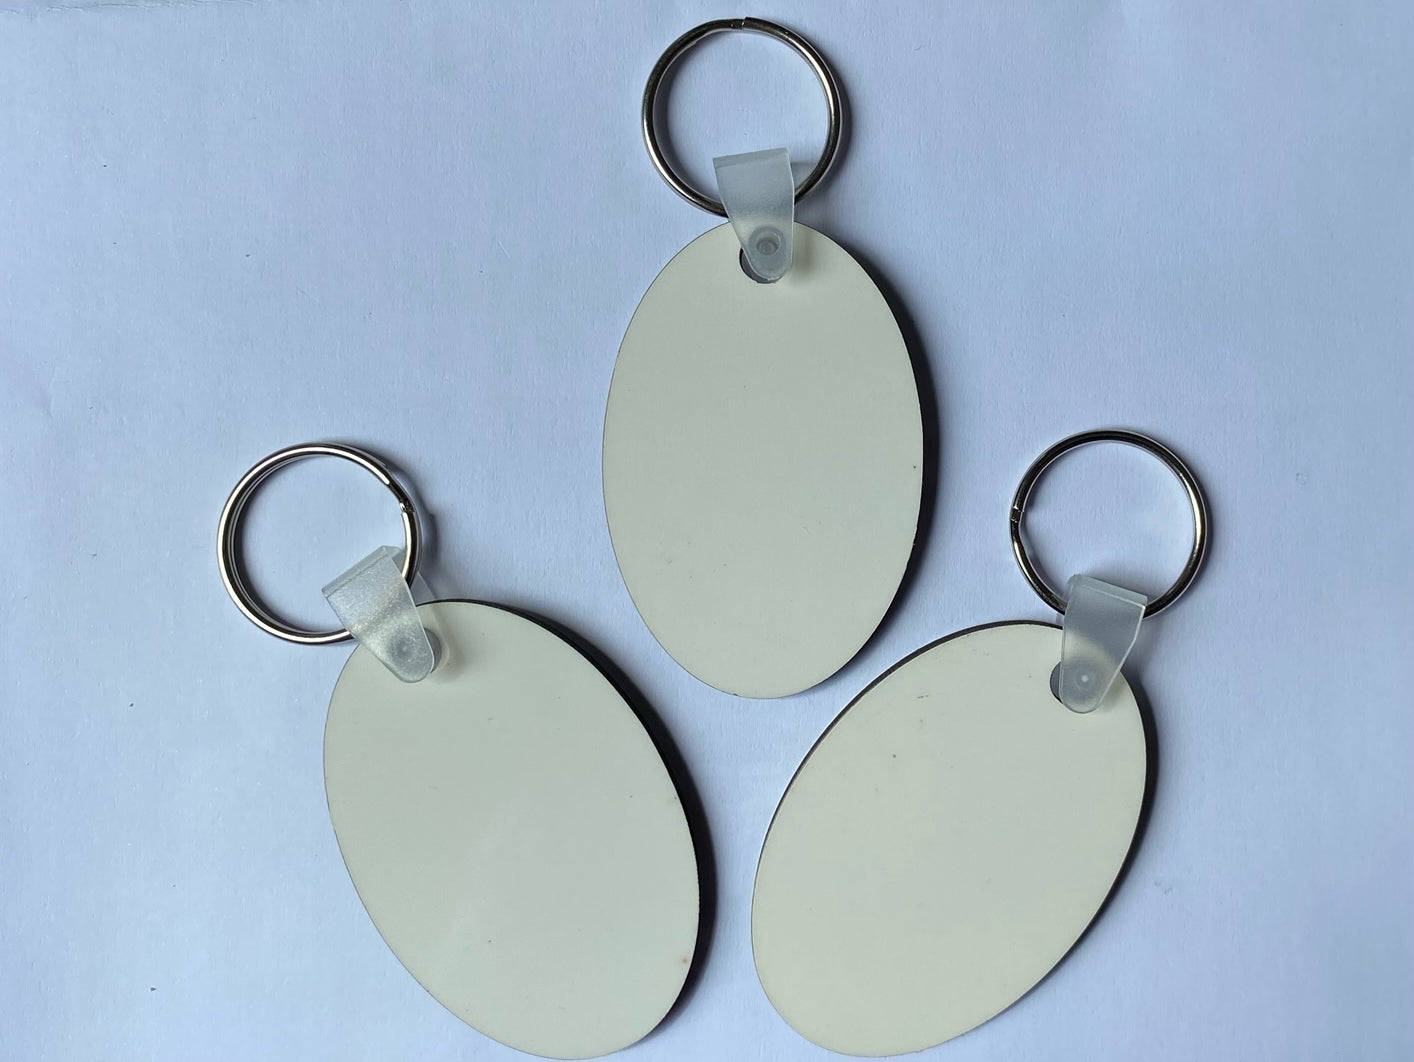 12 x Blank Sublimation MDF Keyrings 6cm x 4cm Double Sided Oval